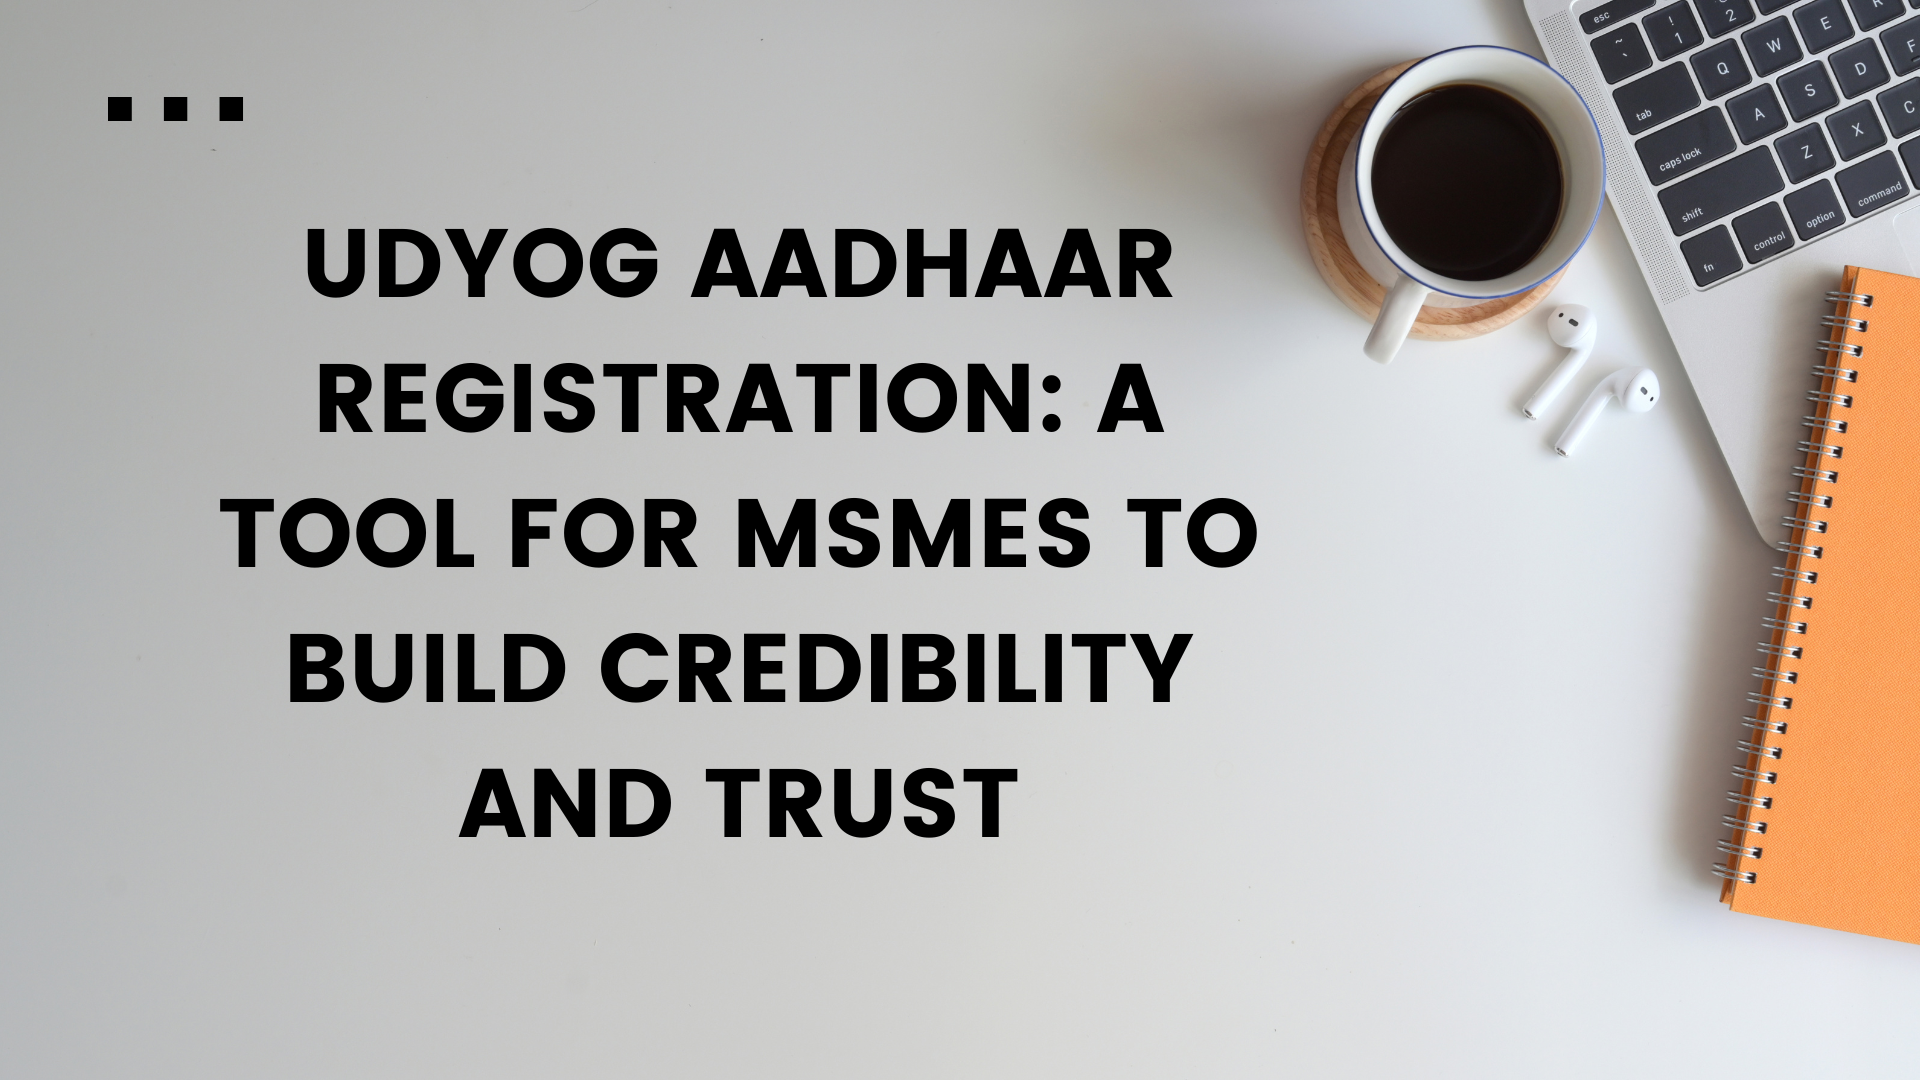 Udyog Aadhaar Registration A Tool for MSMEs to Build Credibility and Trust